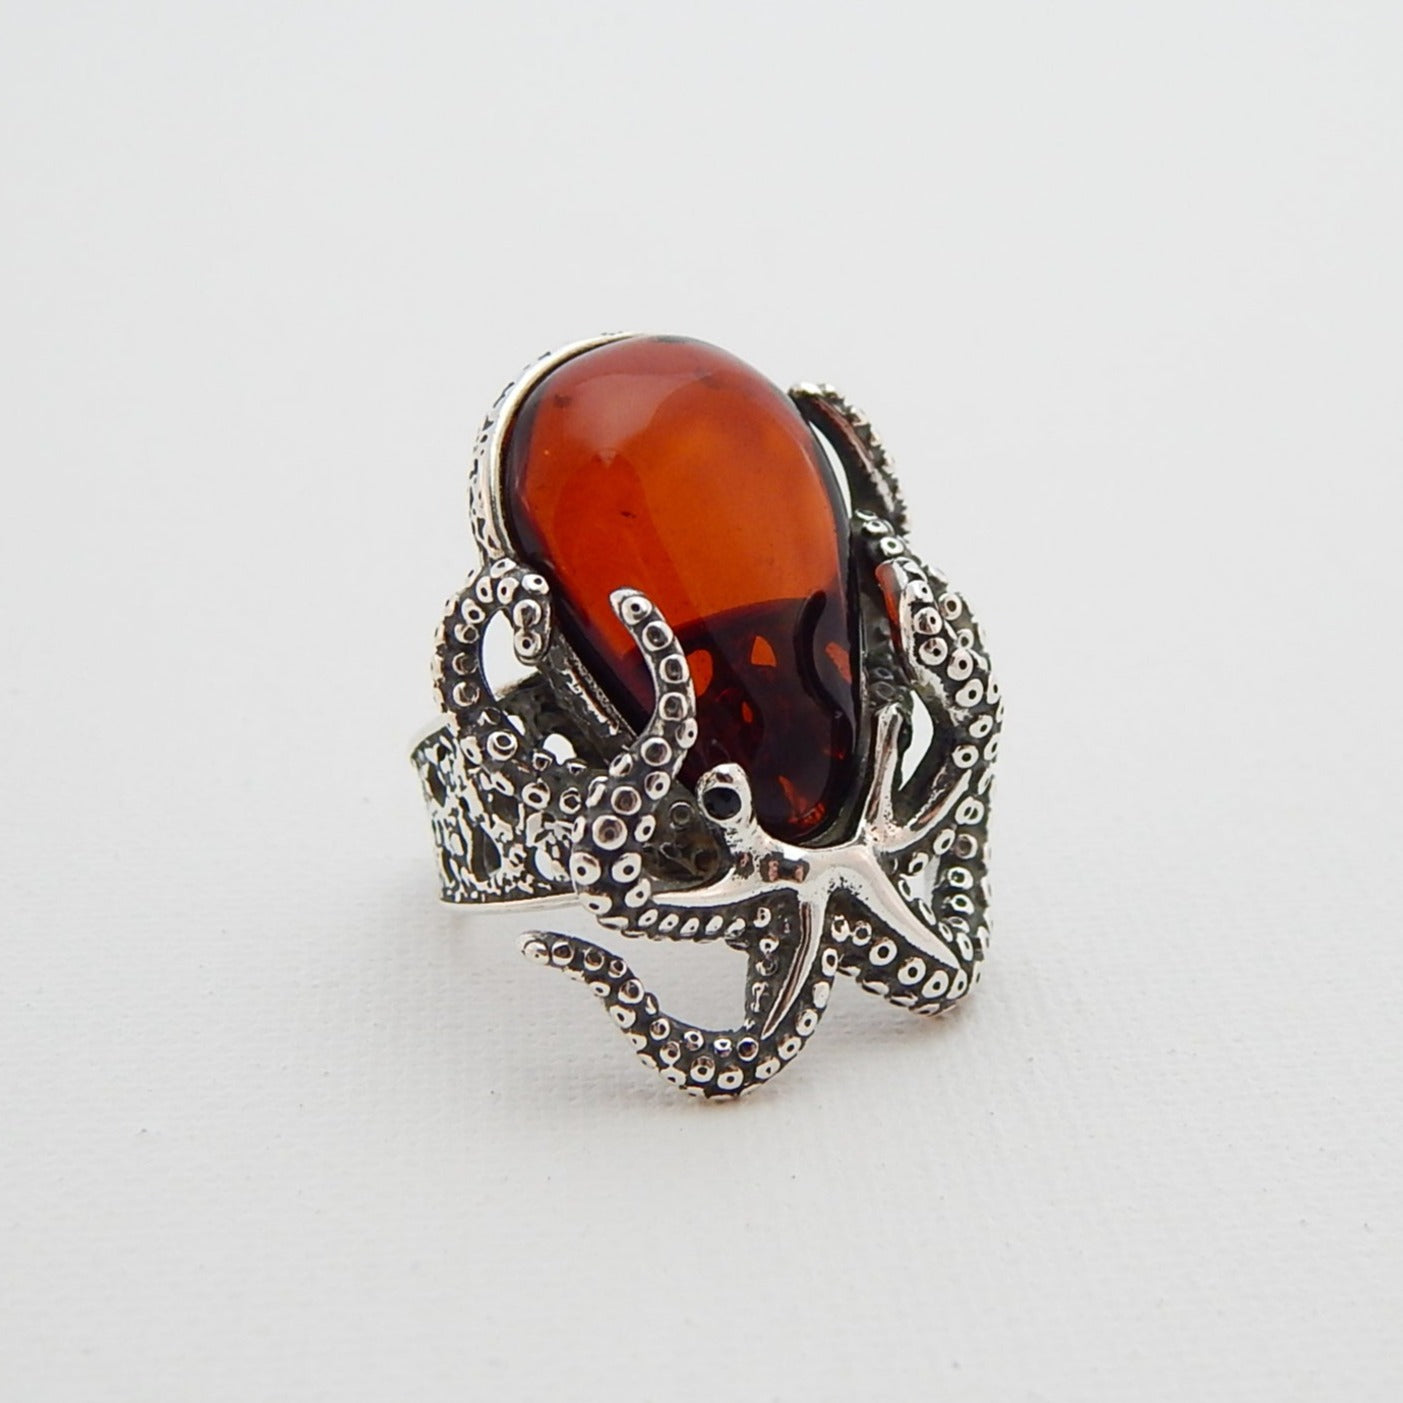 Natural Baltic Cherry Amber Adjustable Octopus Statement Ring in 925 Sterling Silver